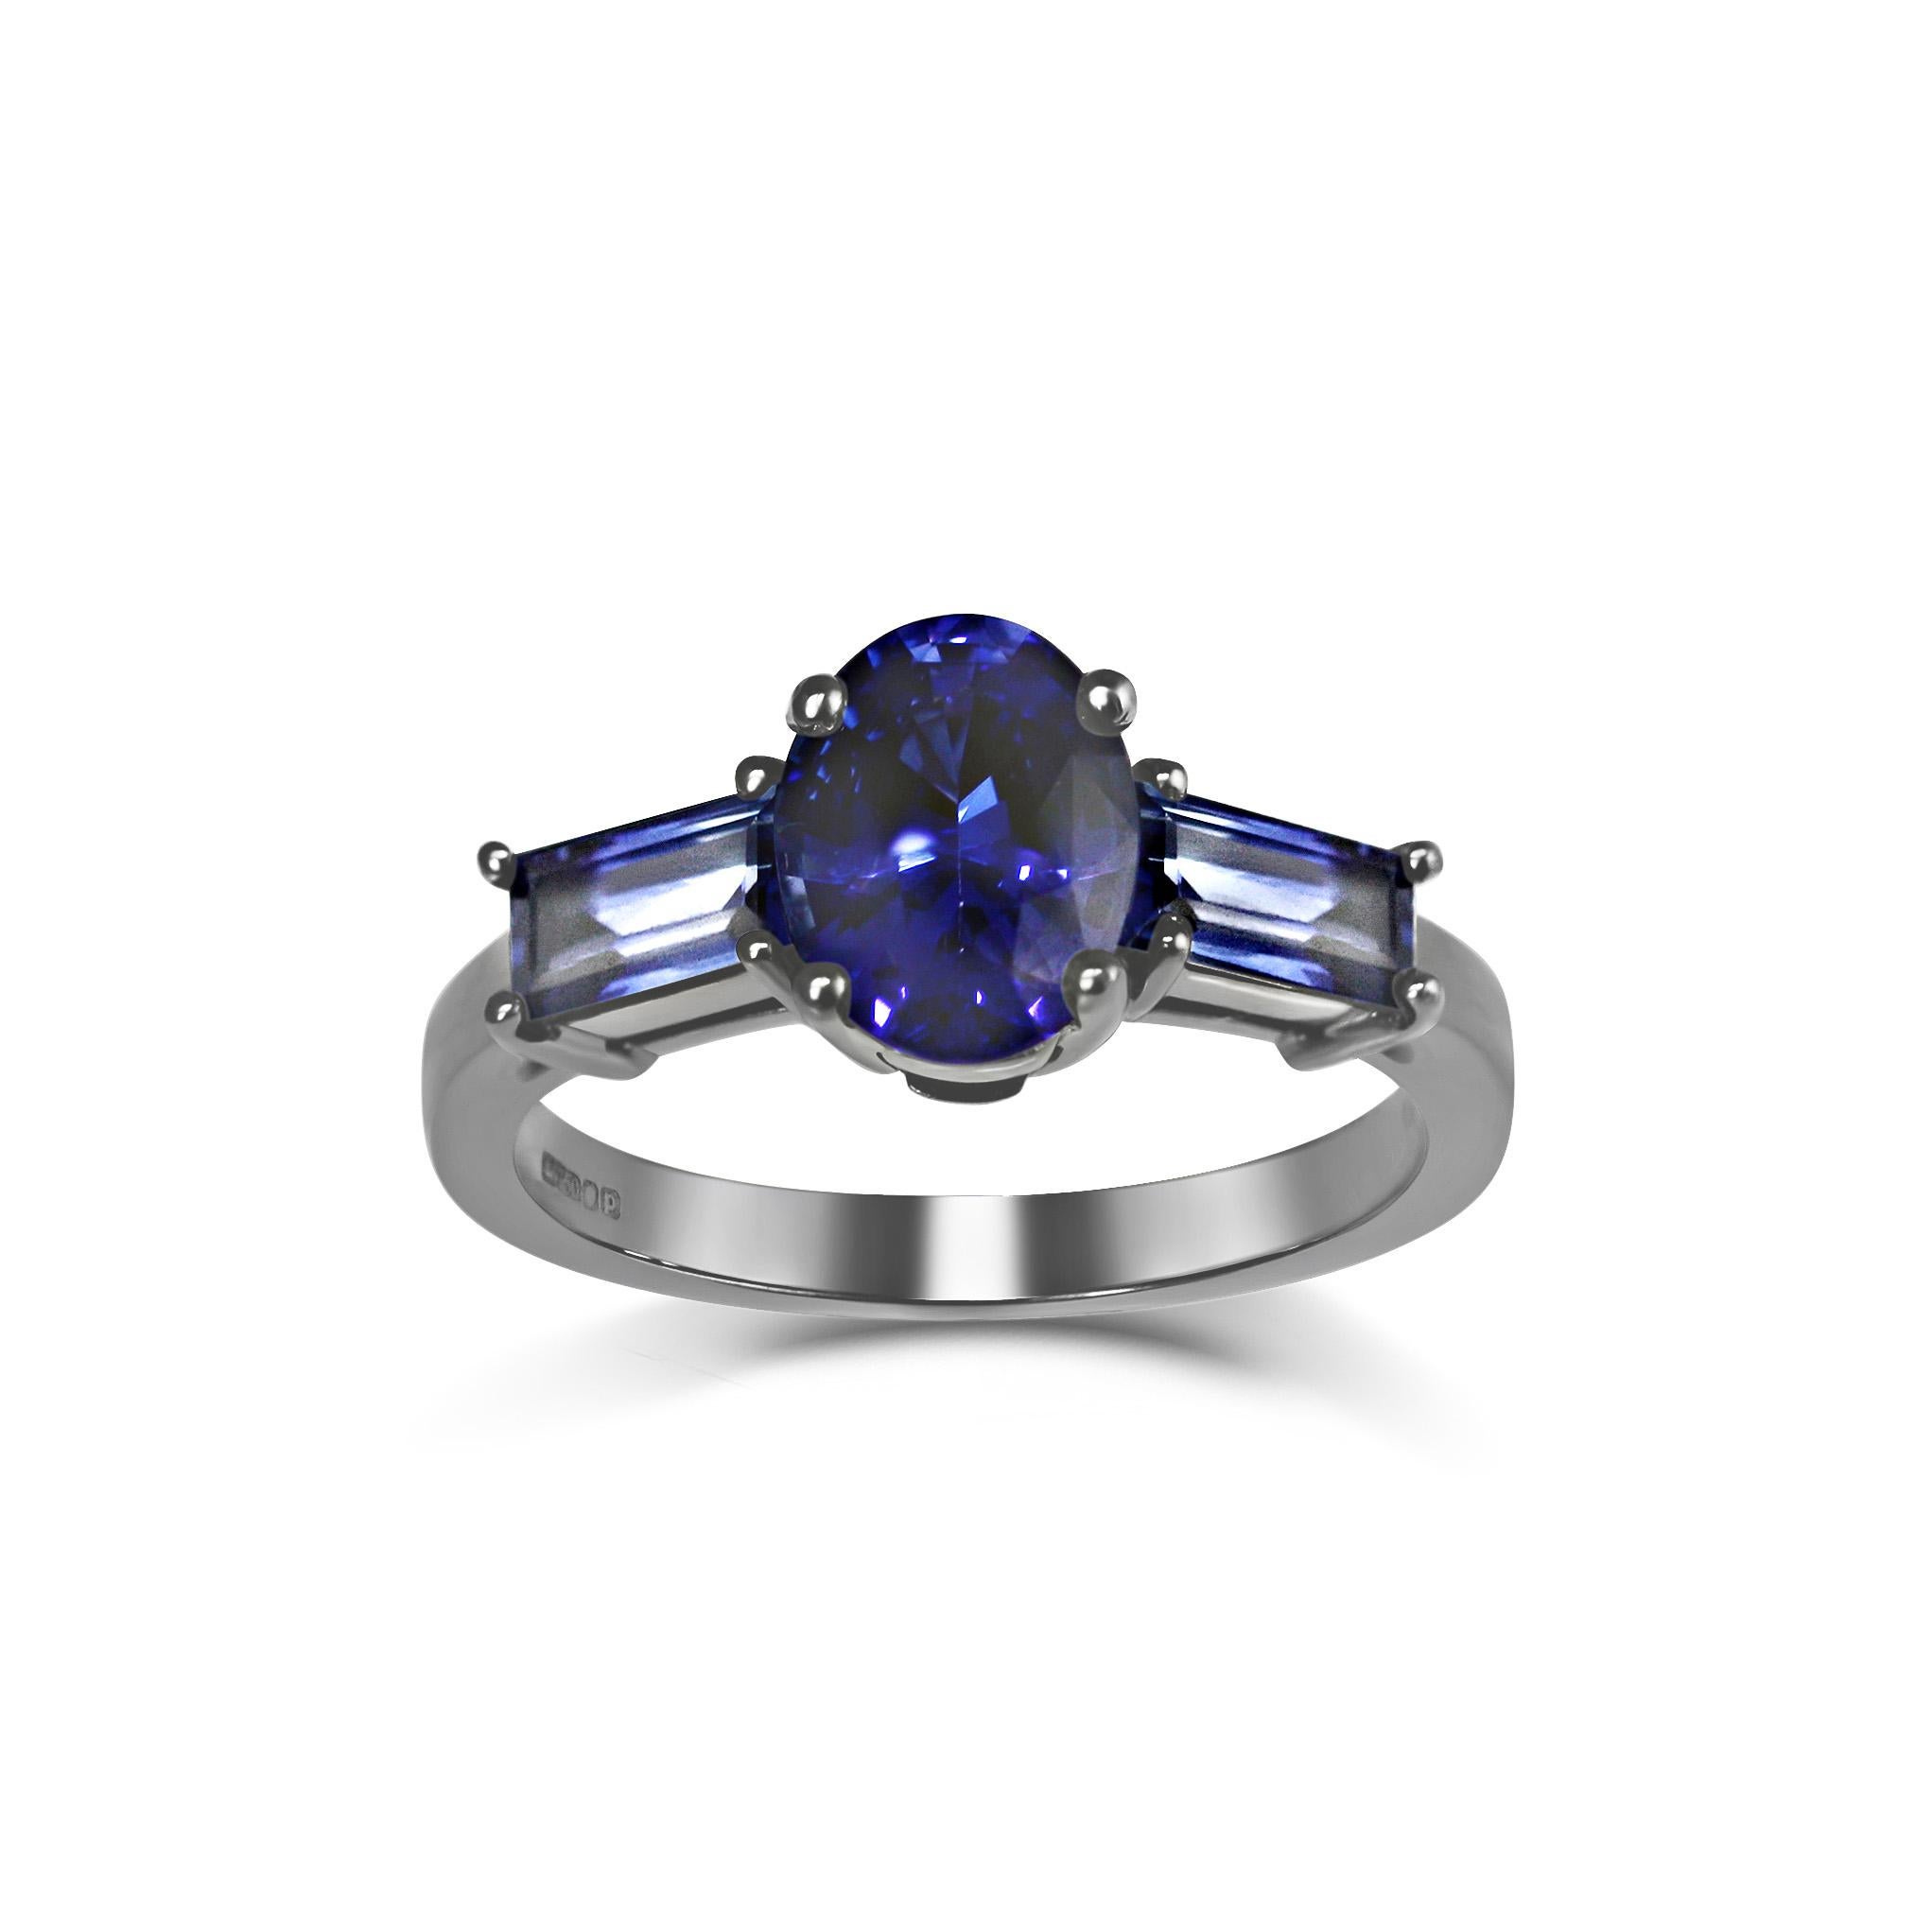 Beautiful clear blue midnight pools reflecting the light of the Moon, bound in shadow and mystery.
The enigmatic Luna ring, a ring as unique as she is.	

KATA Jewellery's Unique Oval & Baguette Sapphire Three Stone Trilogy Ring with Black Rhodium is